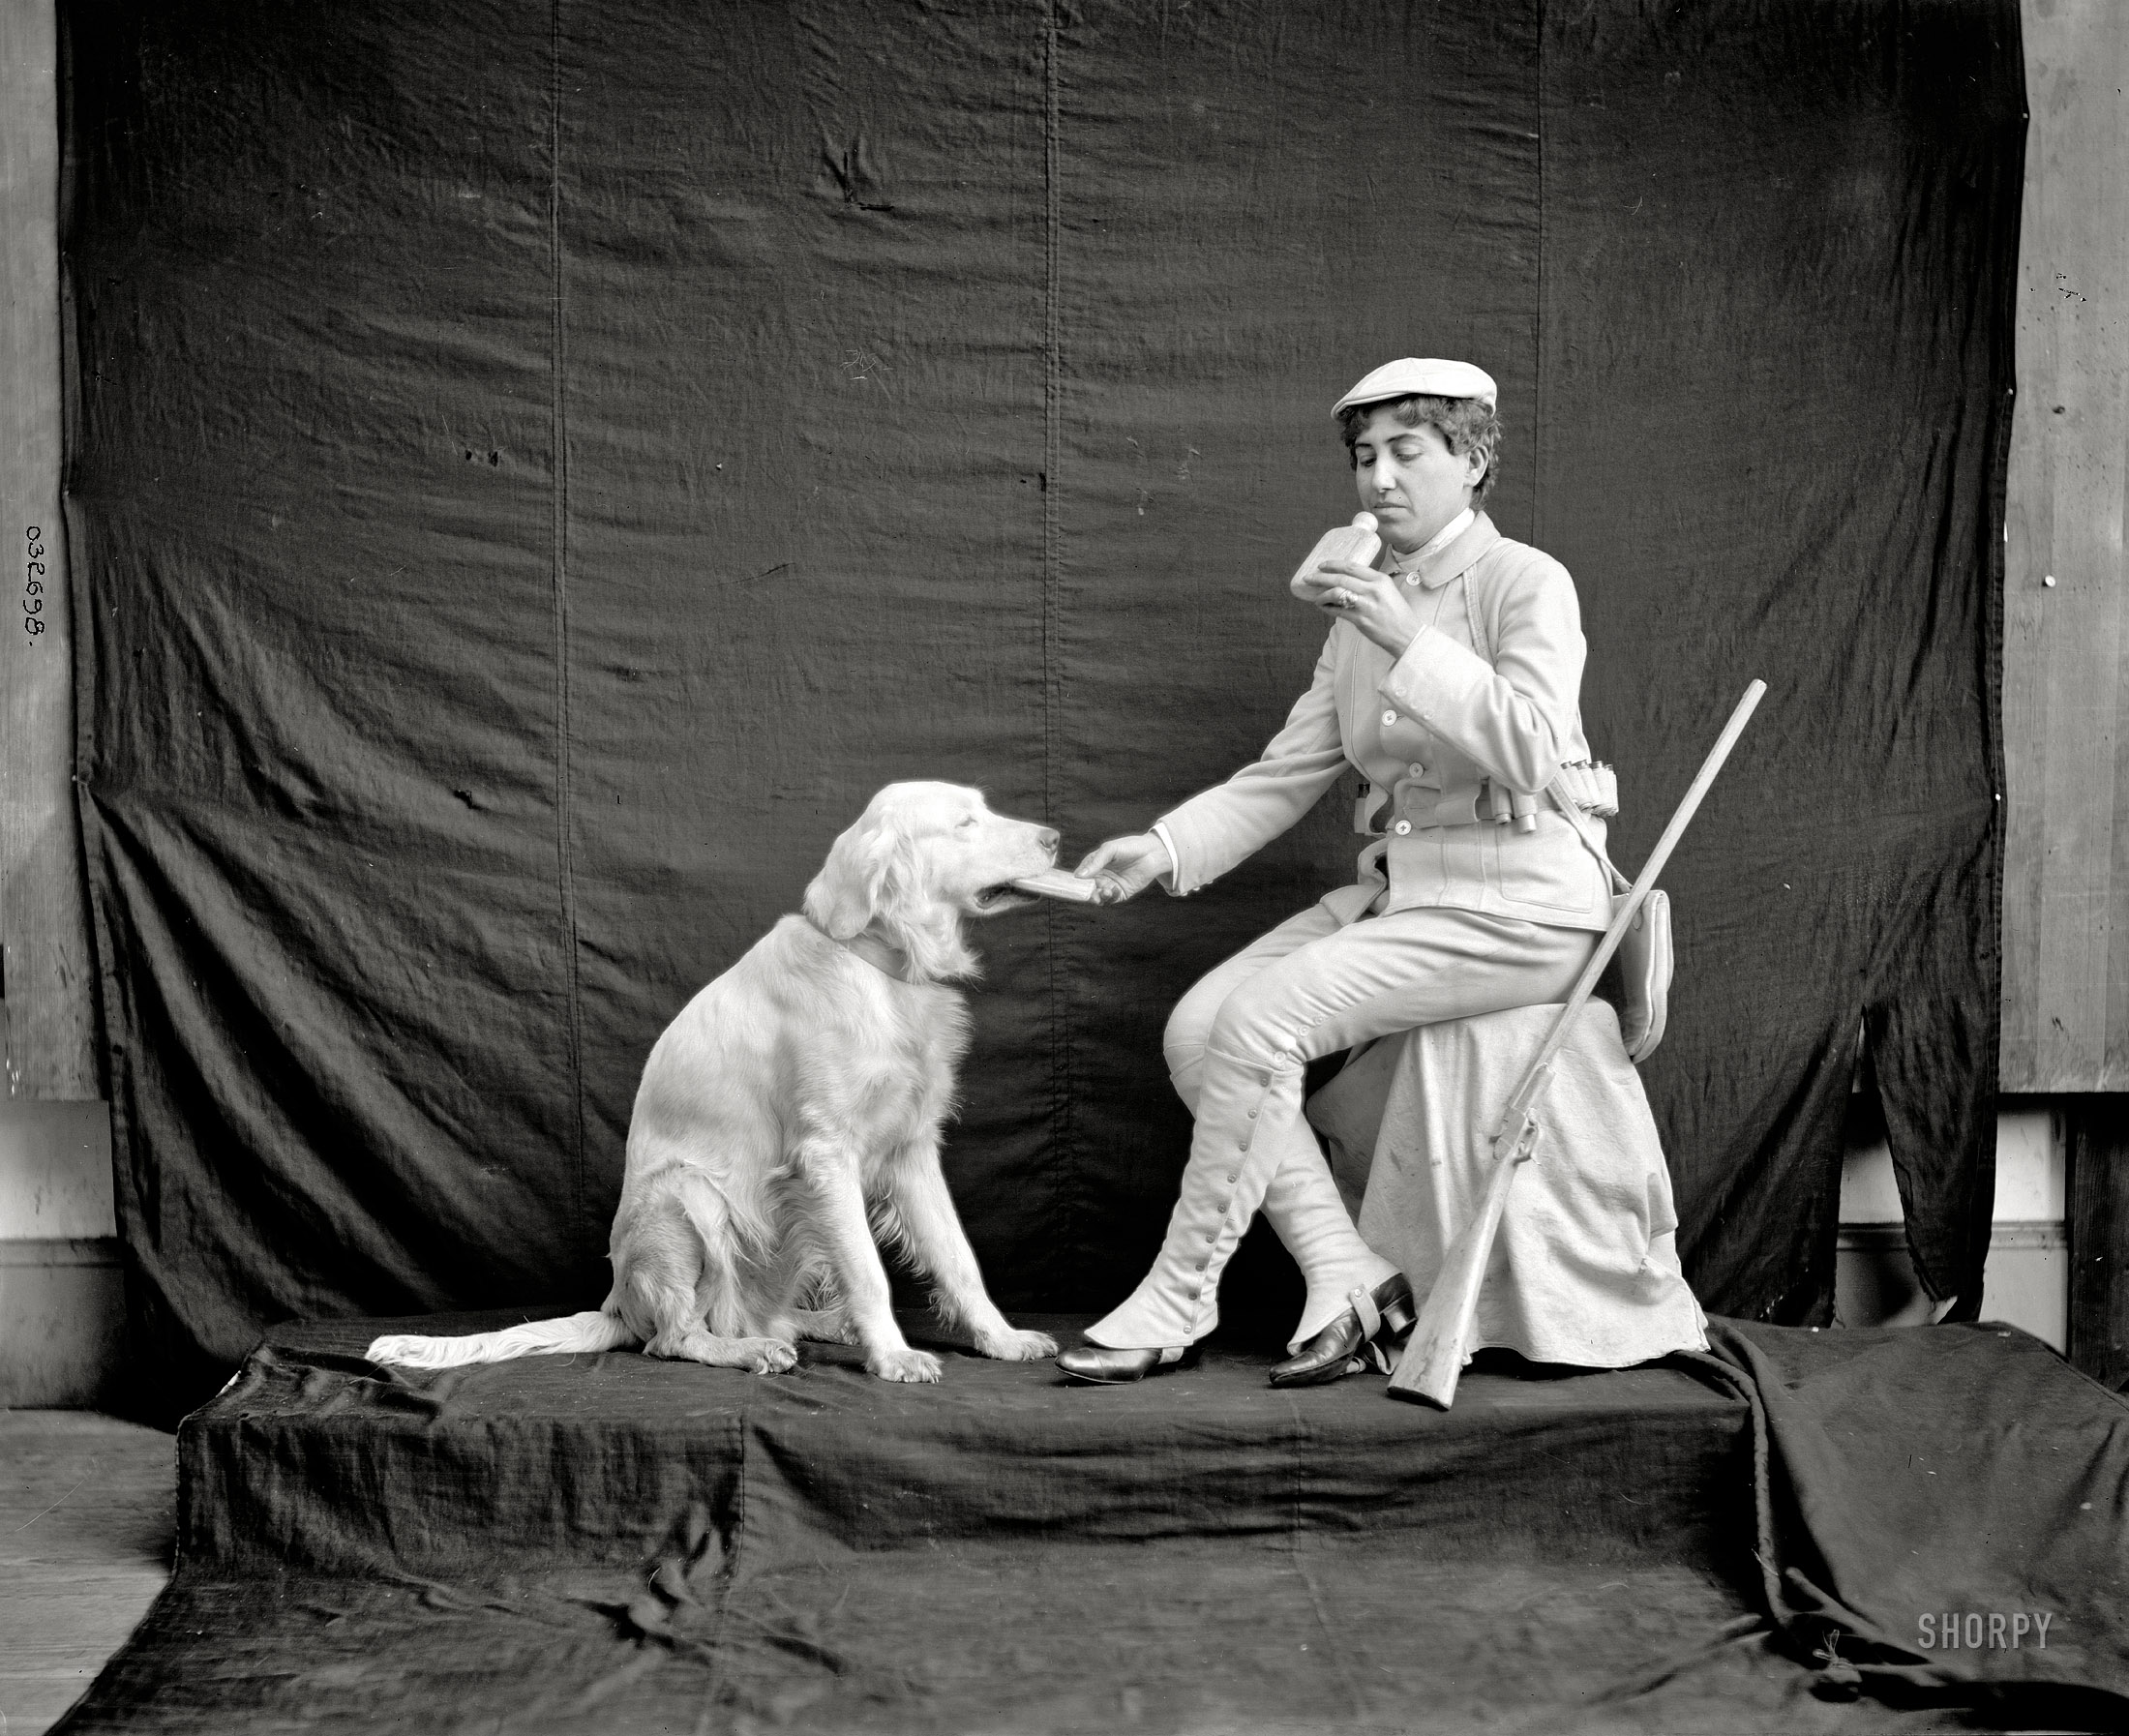 Circa 1900s. "Billy and his mistress in hunting poses." One of eight curious portraits of this statuesque pair, who appear almost whitewashed. 8x10 inch dry plate glass negative, Detroit Publishing Company. View full size.